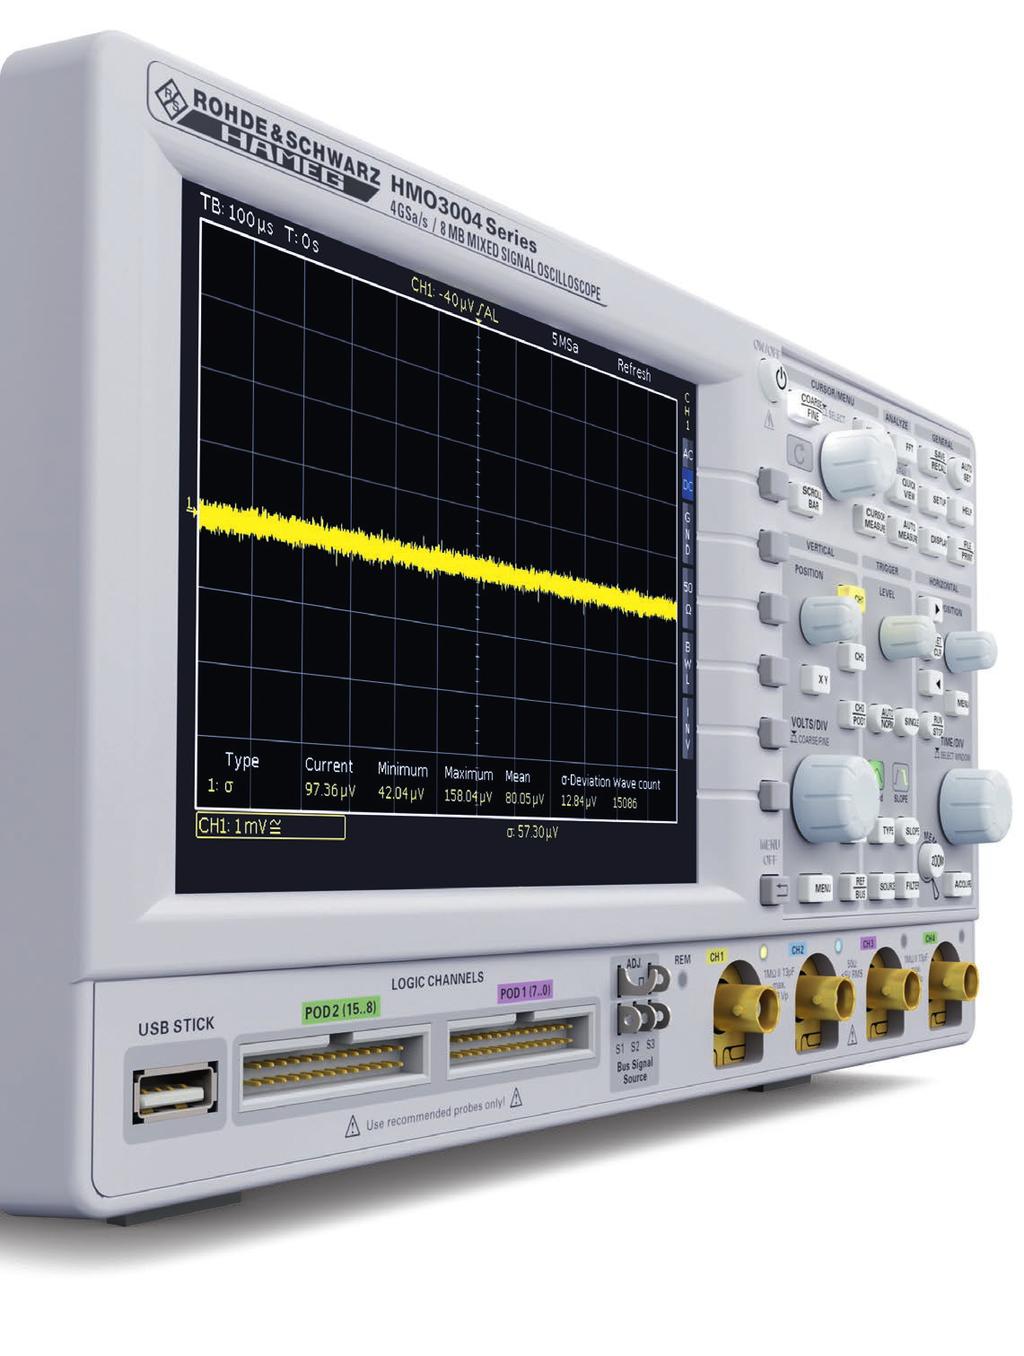 HMO 3000 Series Precise Signal Analysis An excellent sampling rate in combination with a large memory depth is the key for precise signal analysis.